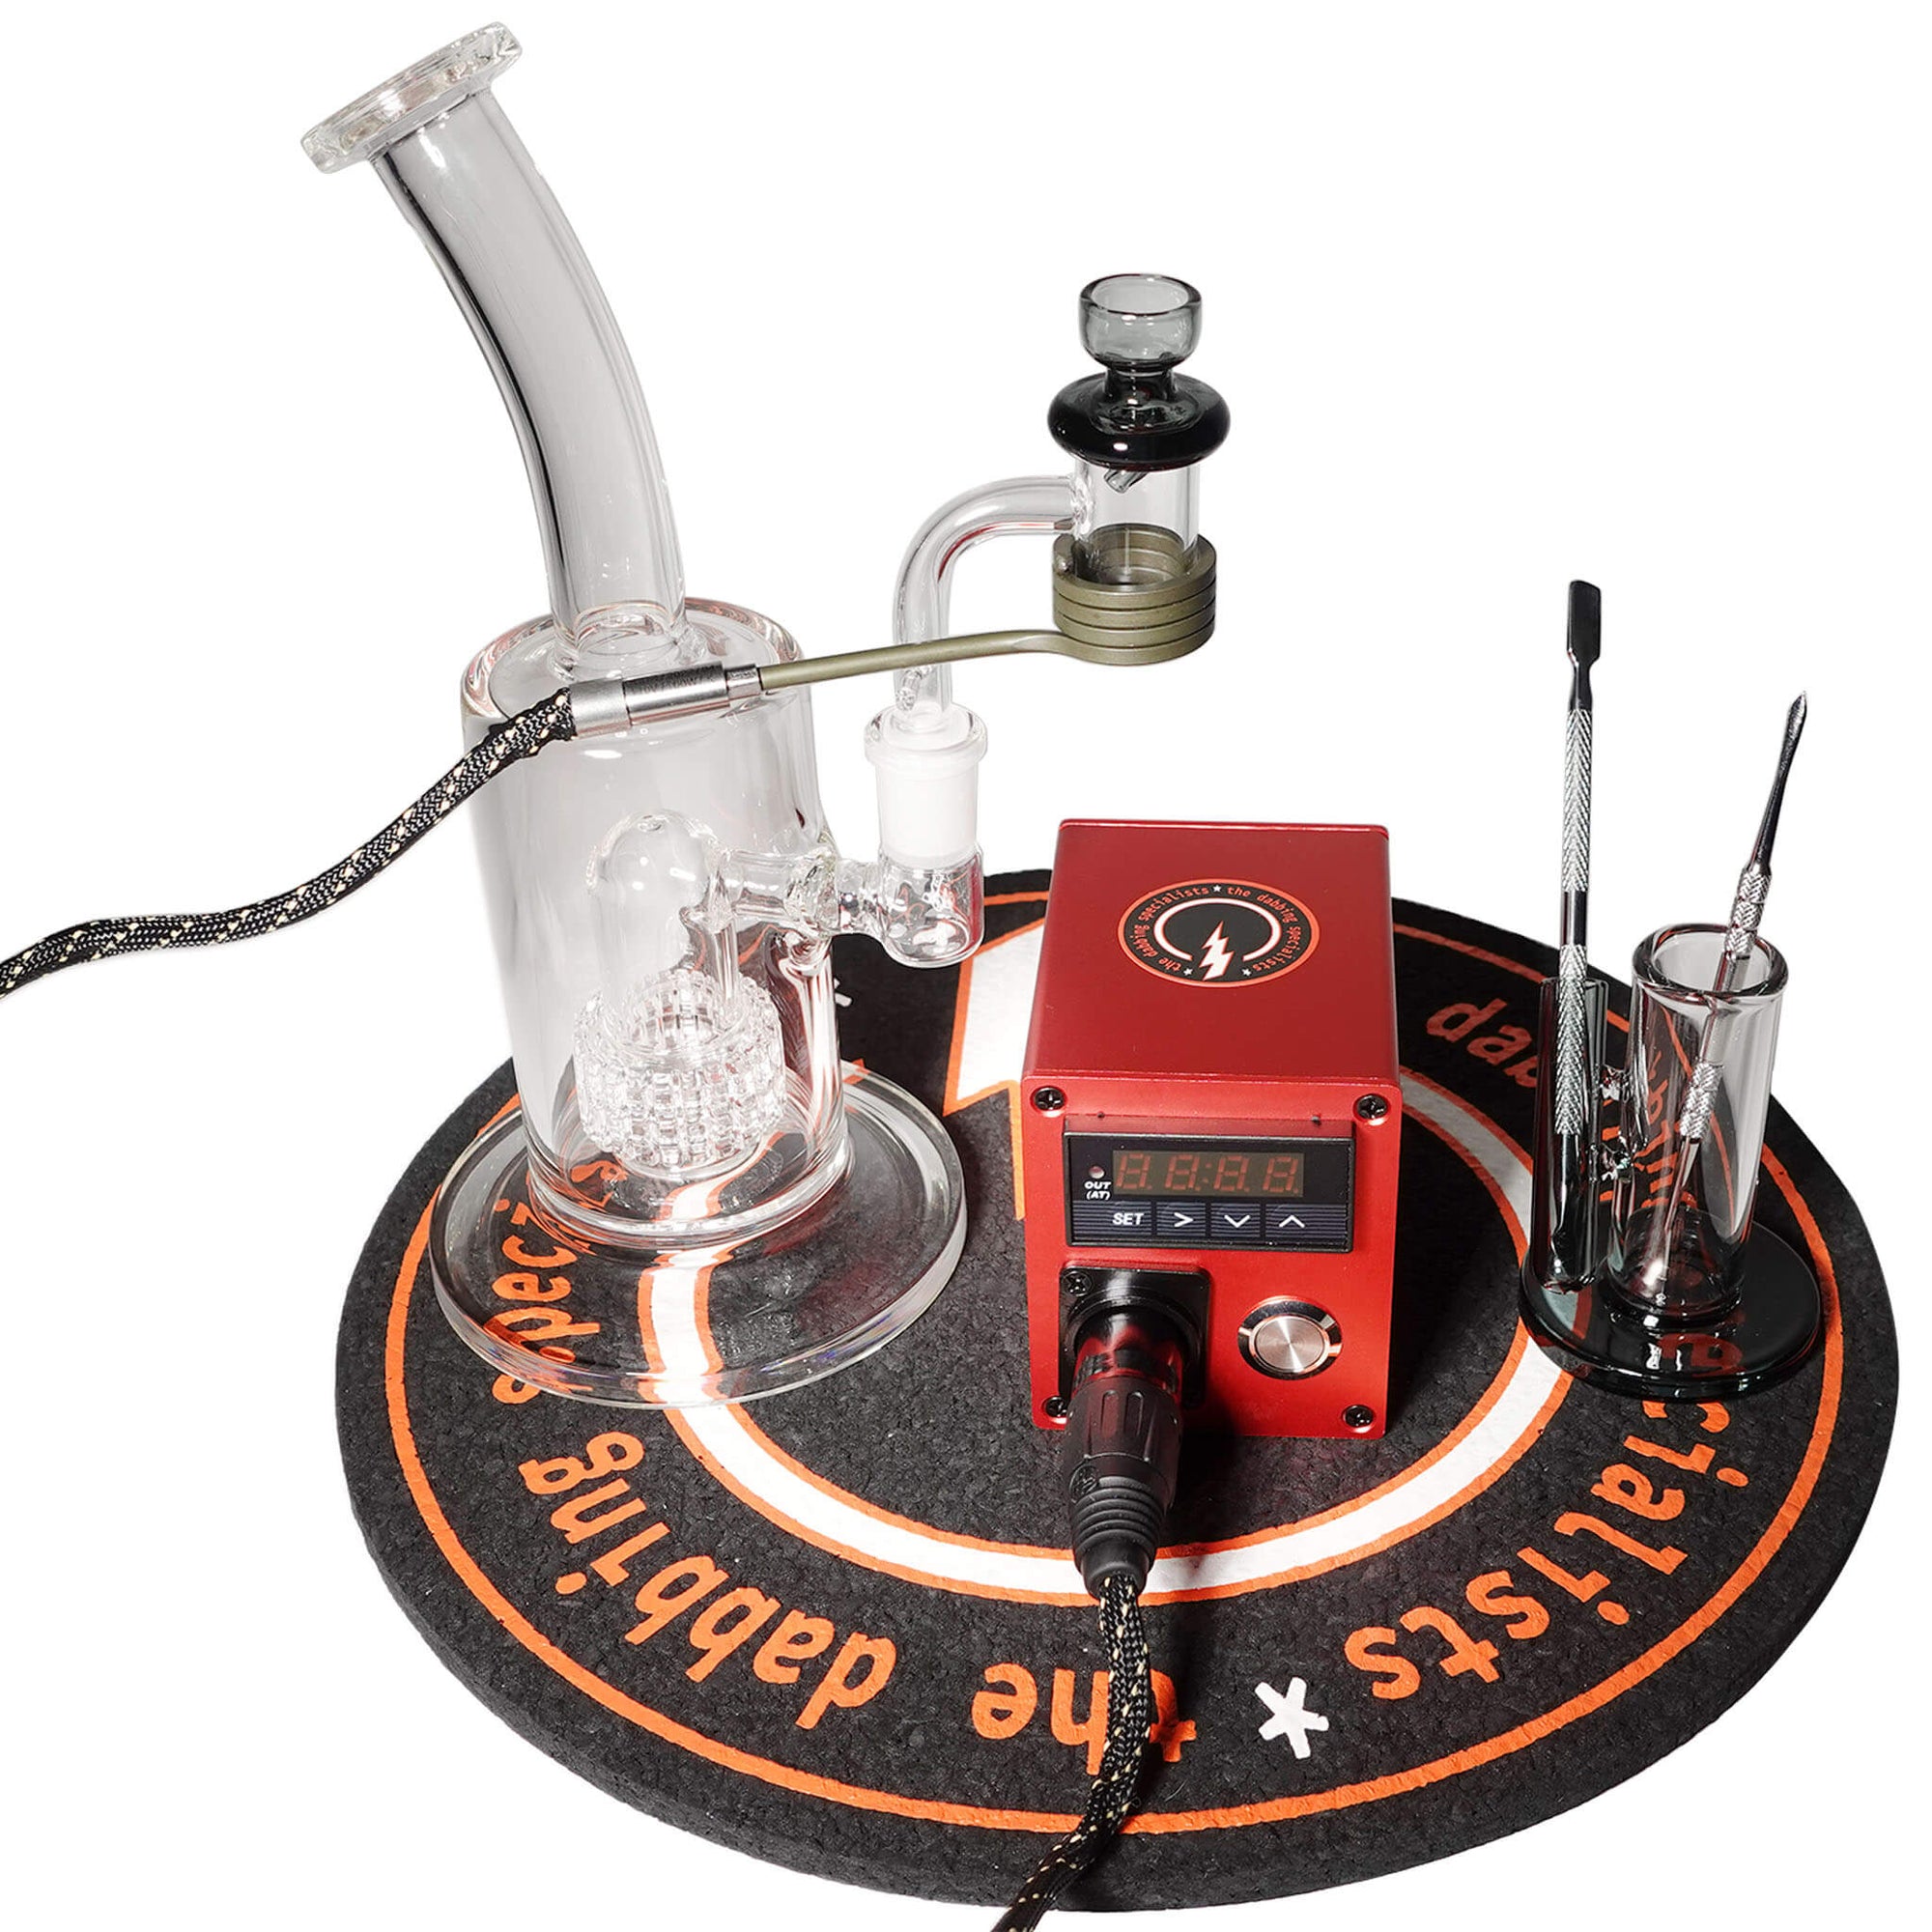 Commander 20mm E-Banger Deluxe Enail Kit | Red Grain Enail Kit View | the dabbing specialists